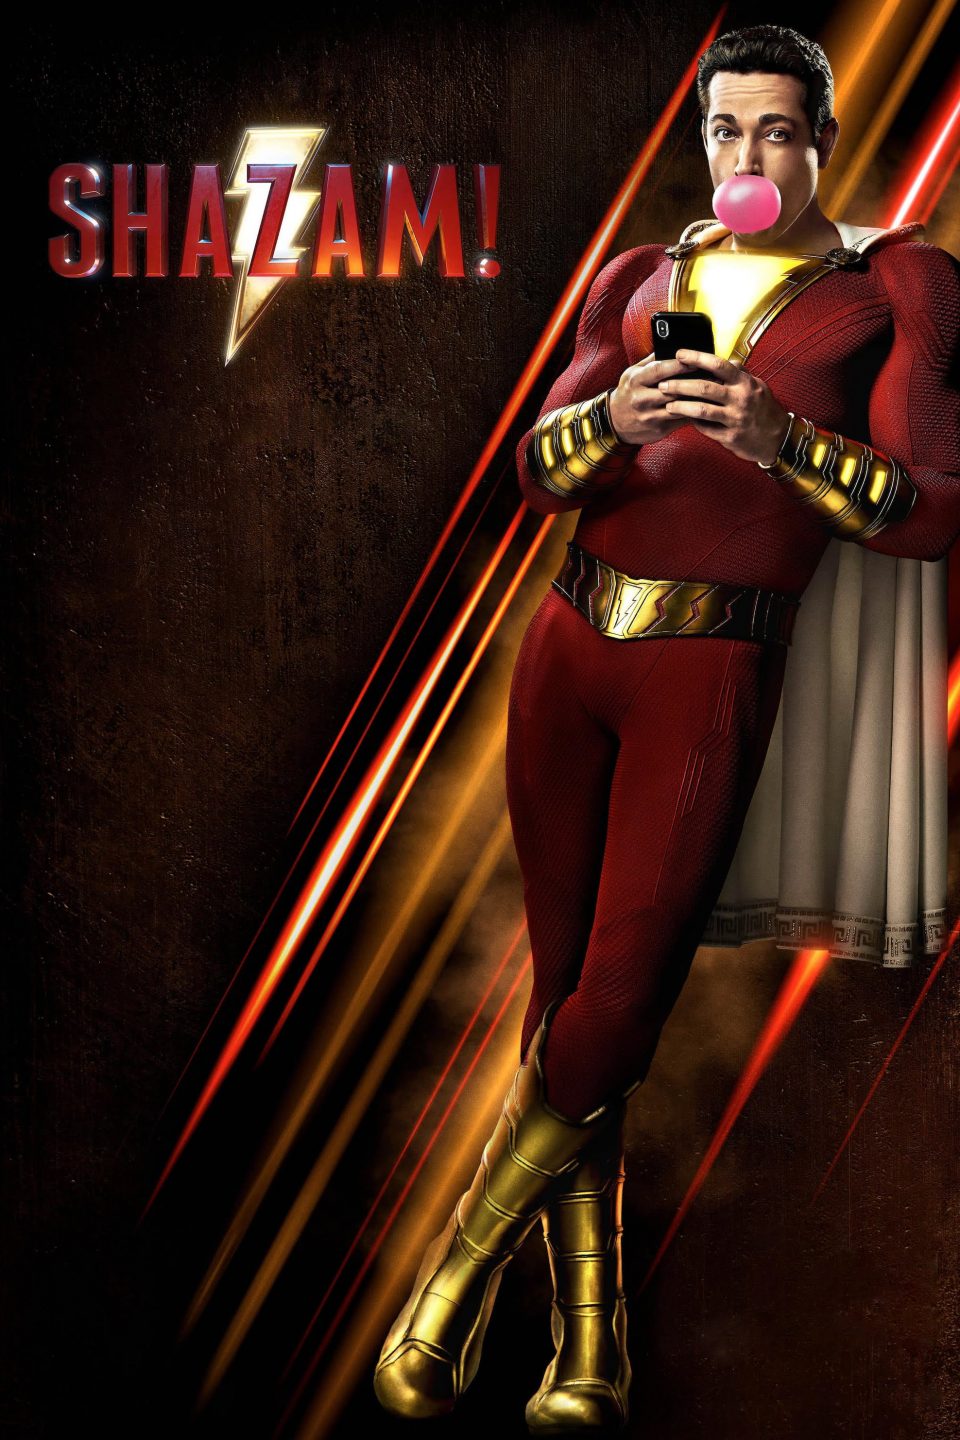 Poster for the movie "Shazam!"